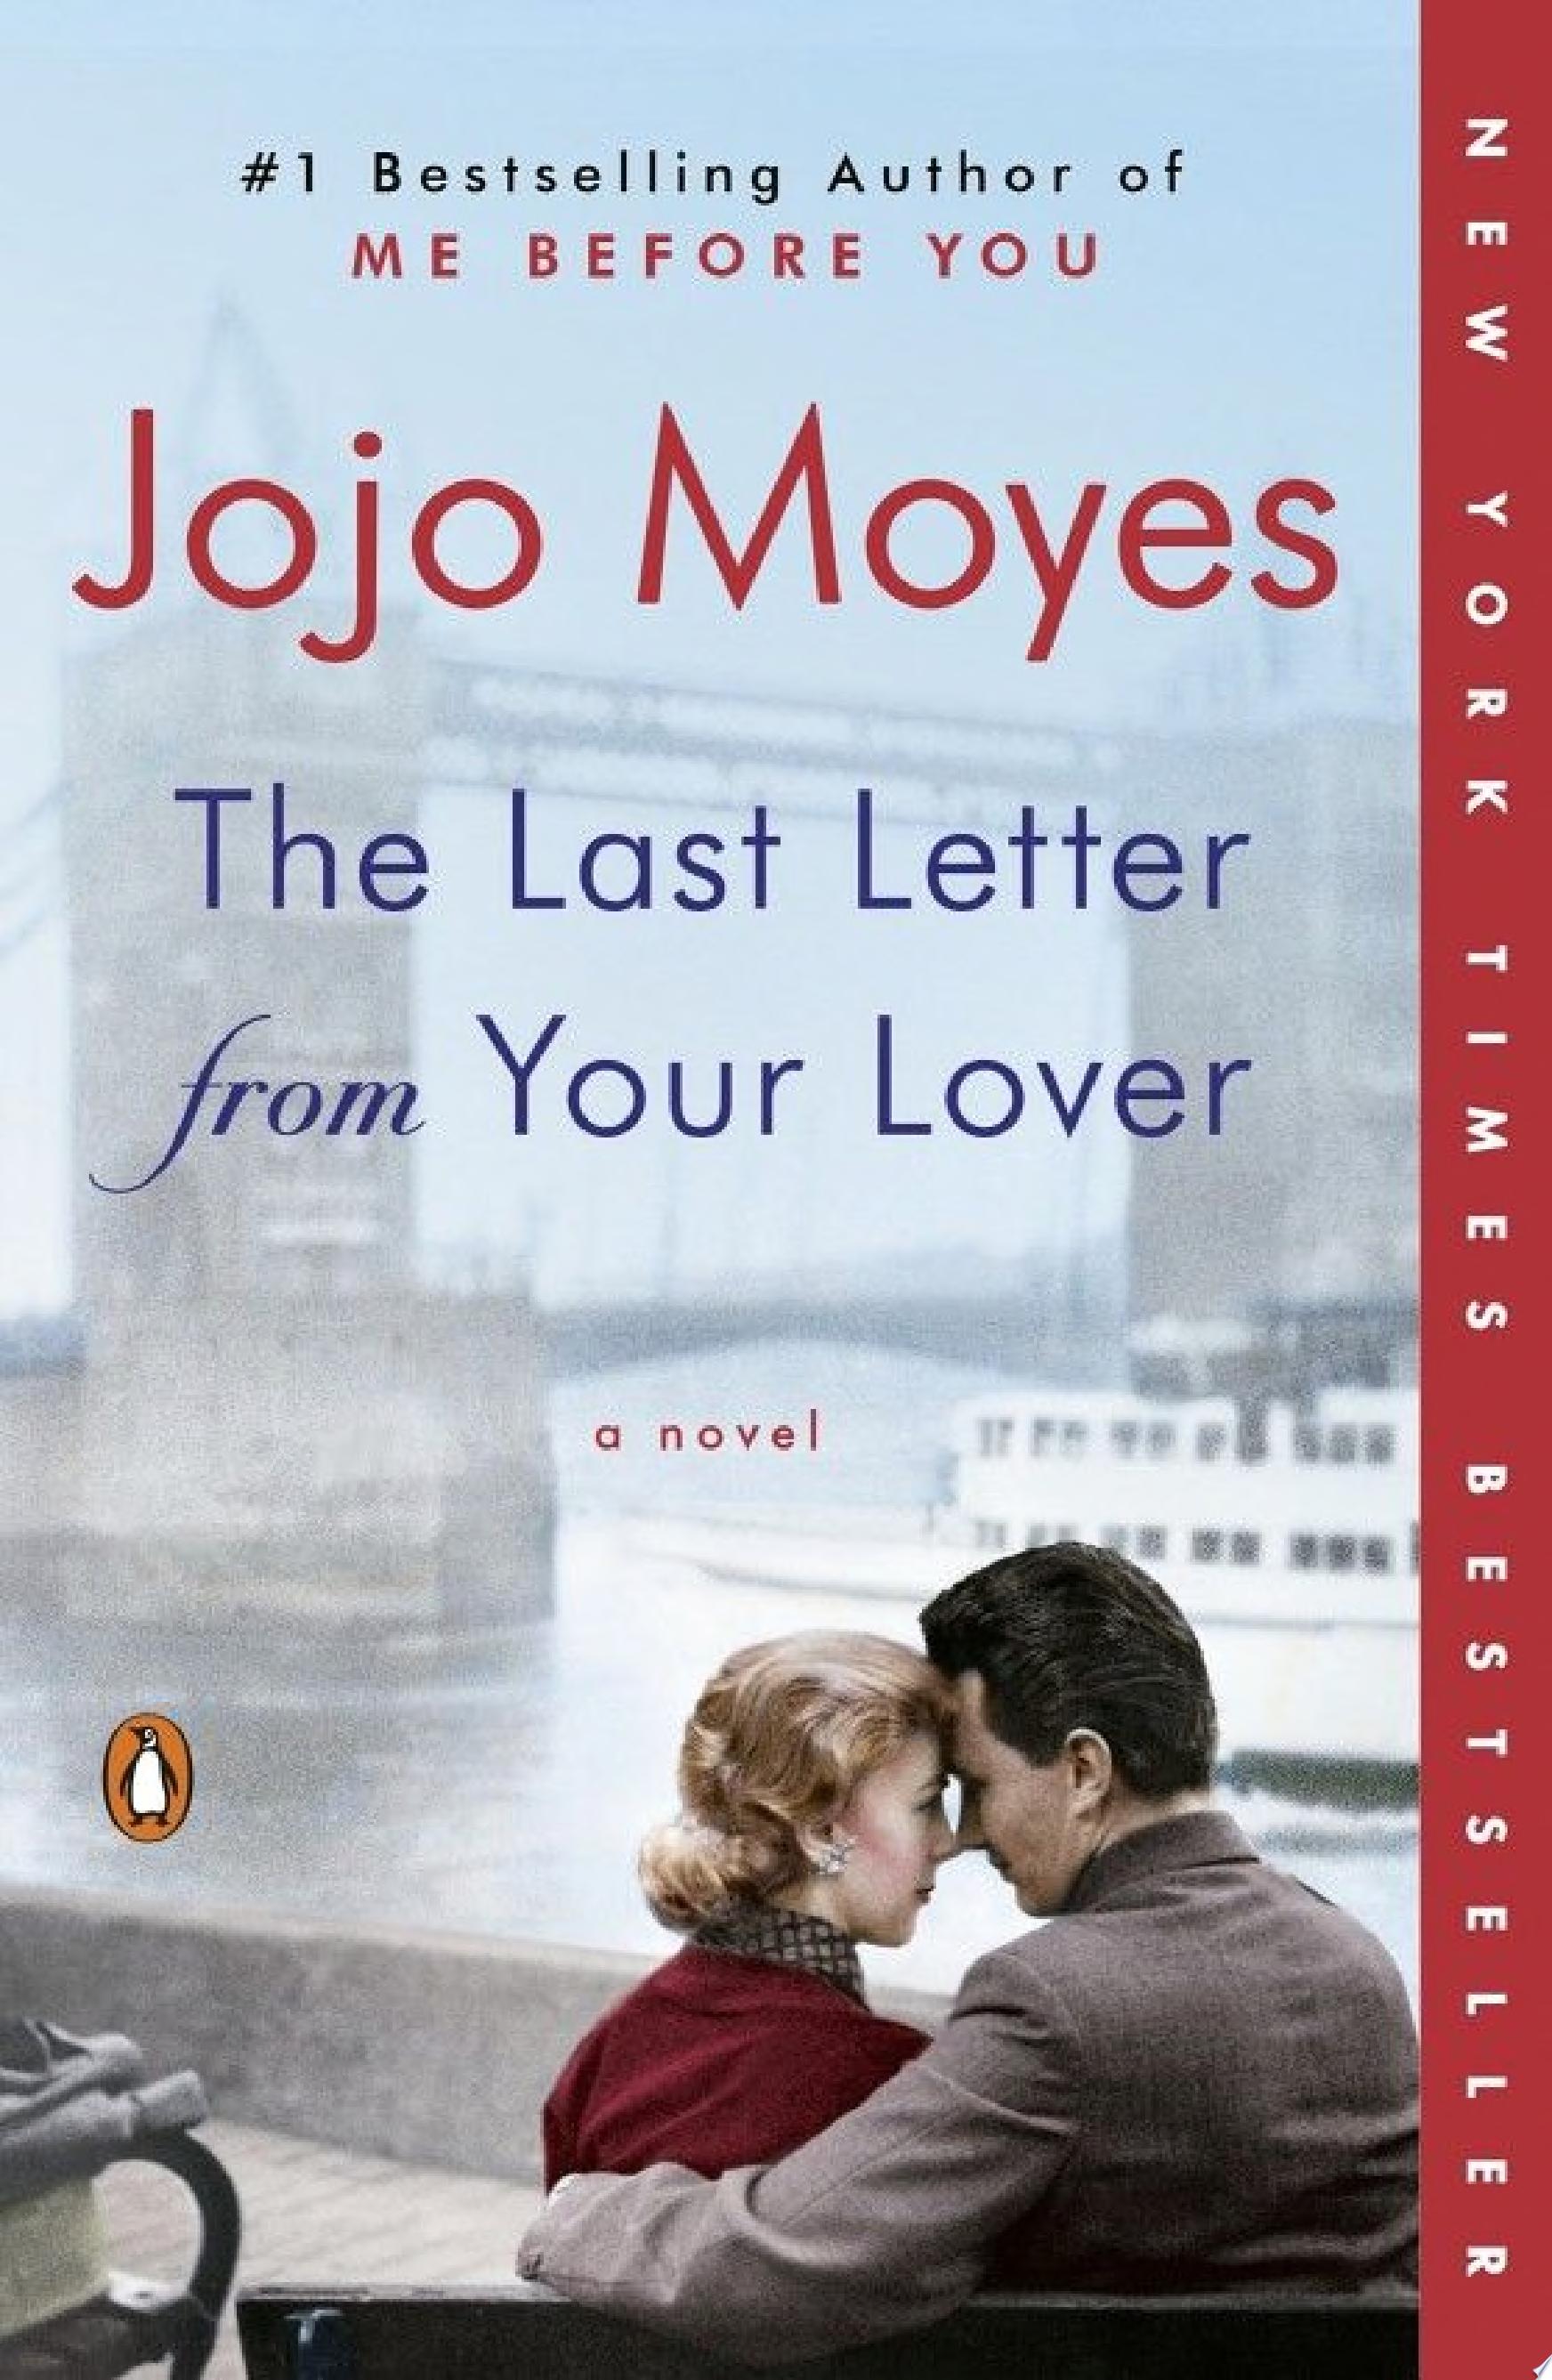 Image for "The Last Letter from Your Lover"